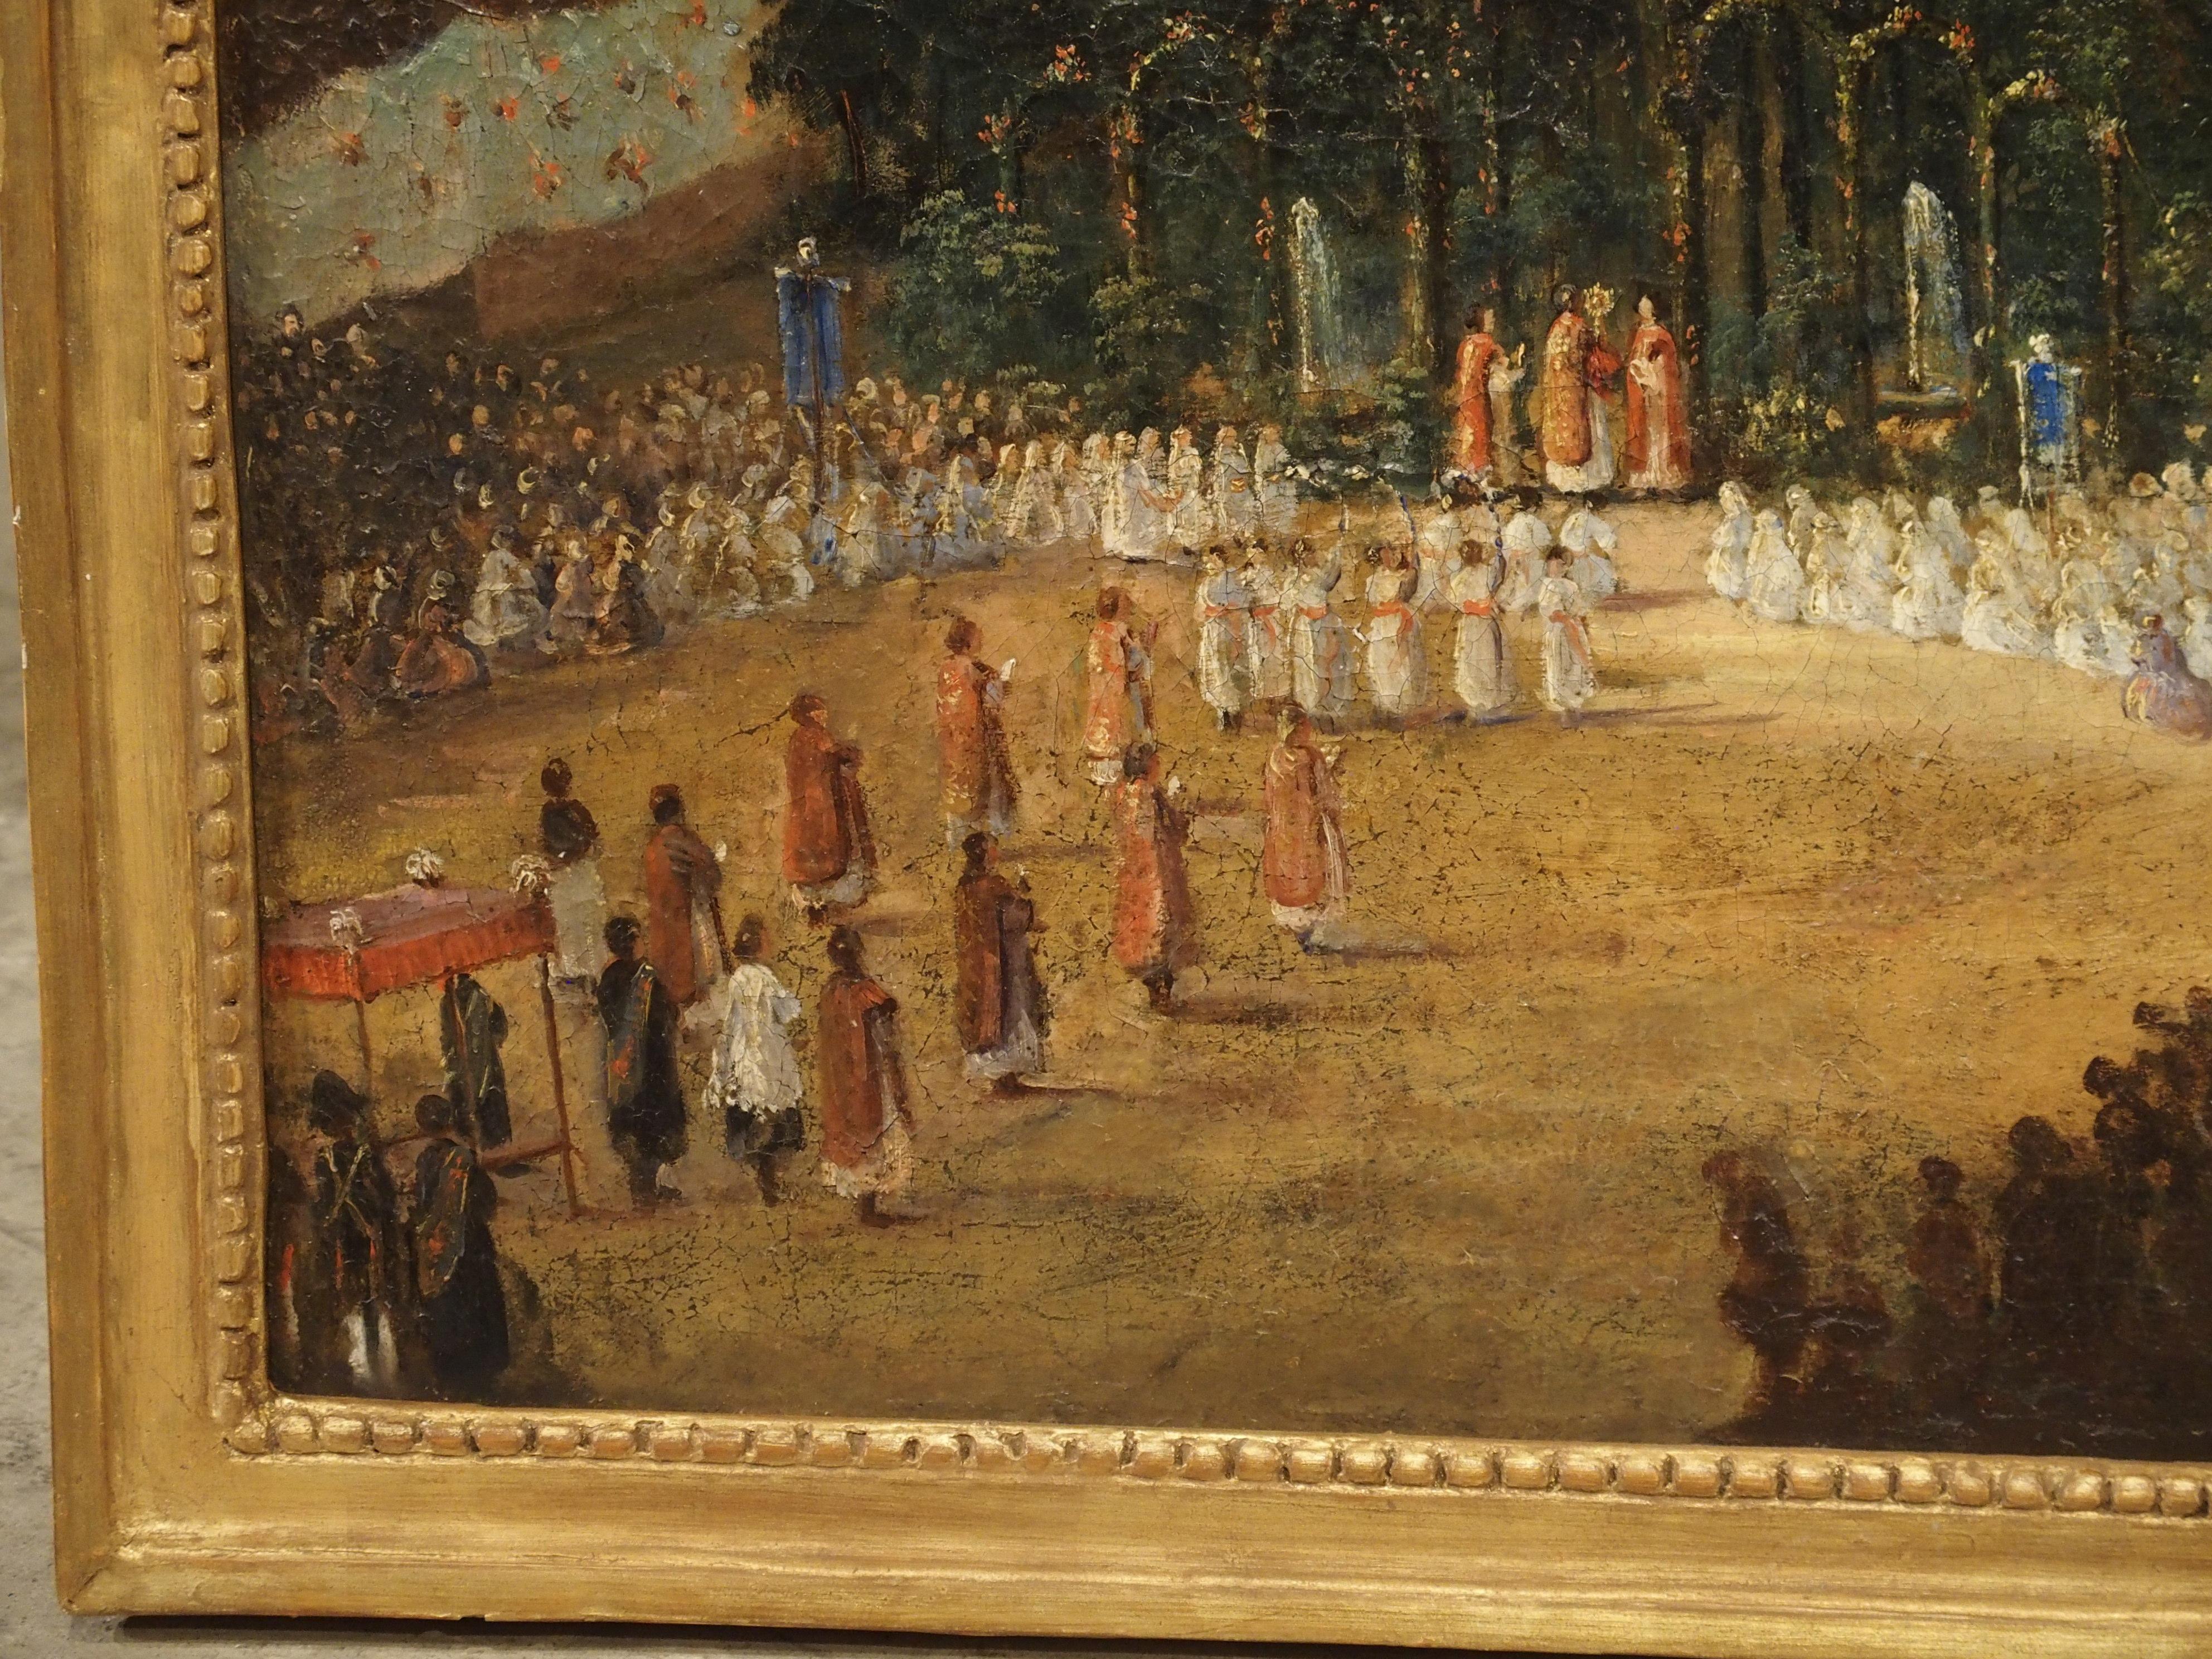 Gilt 19th Century French Oil On Canvas Depicting a Religious Ceremony